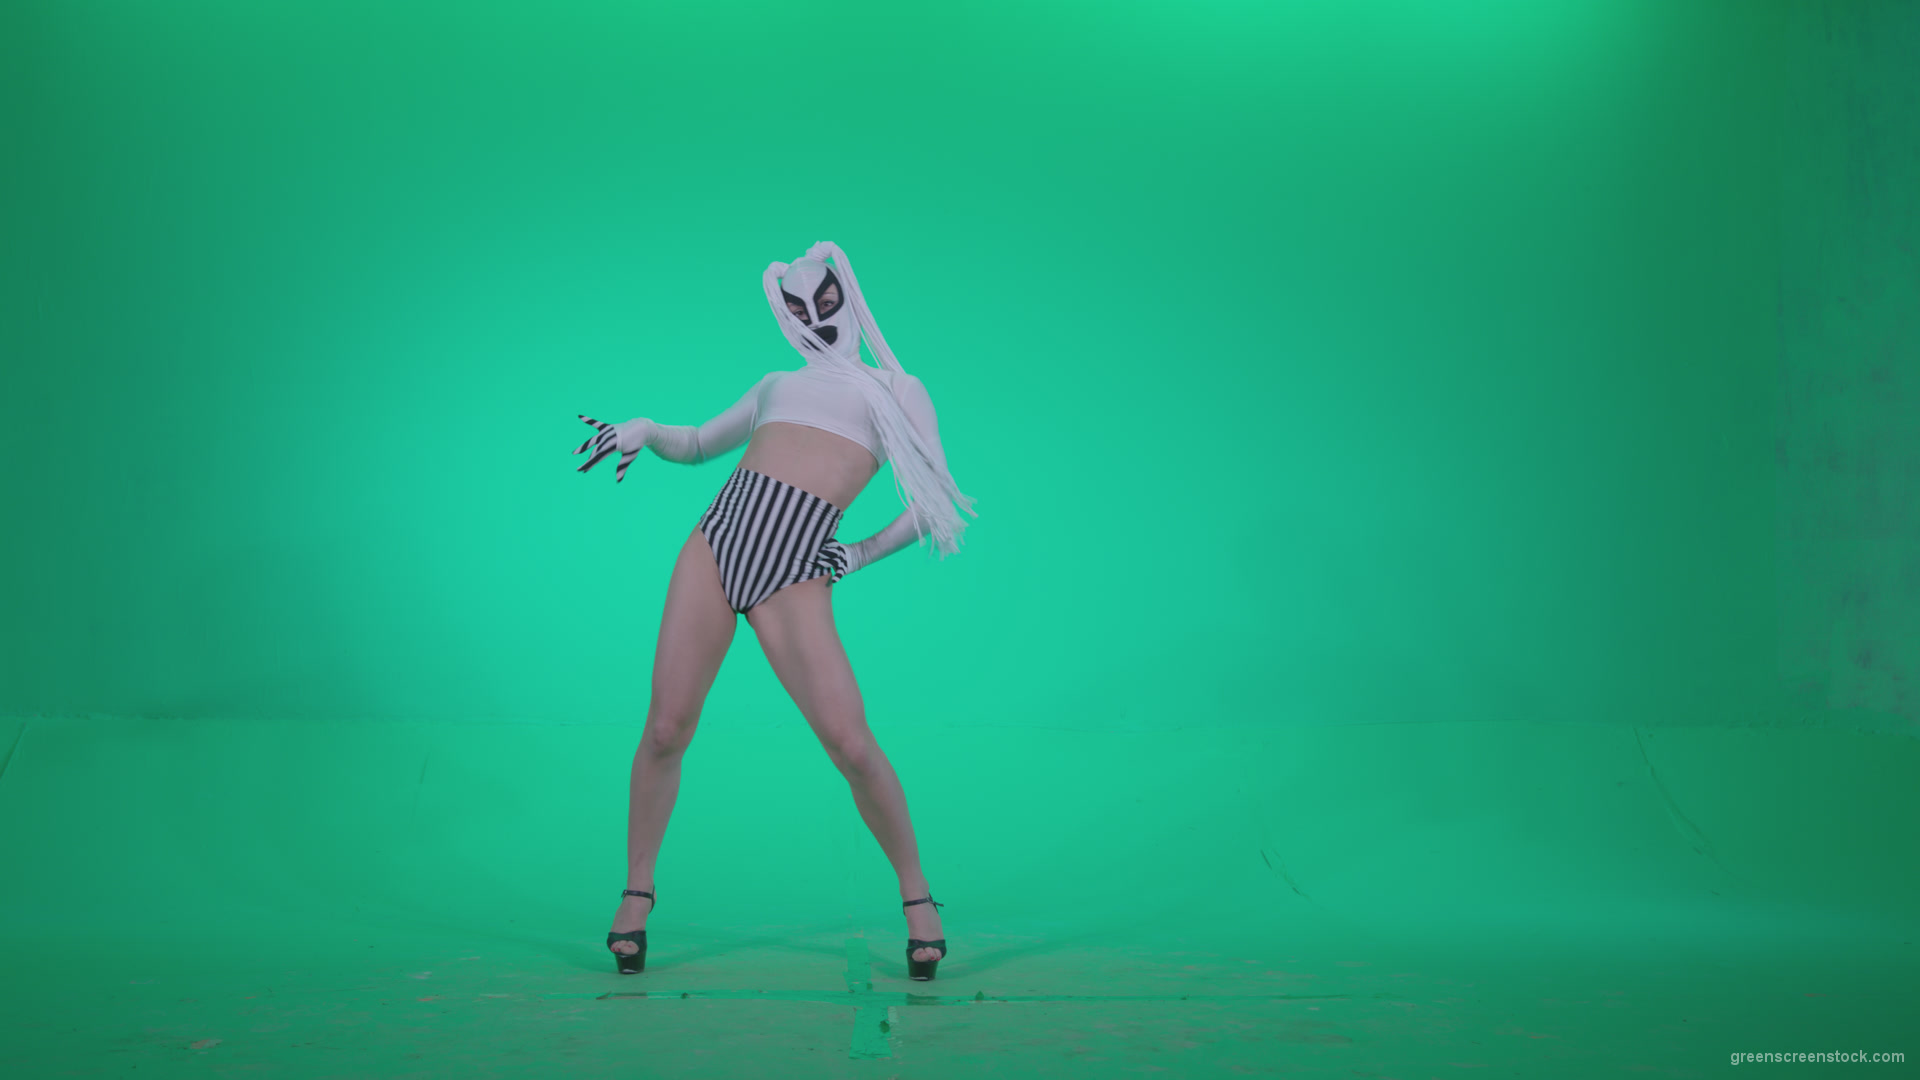 Go-go-Dancer-with-Latex-Top-t7-Green-Screen-Video-Footage_004 Green Screen Stock